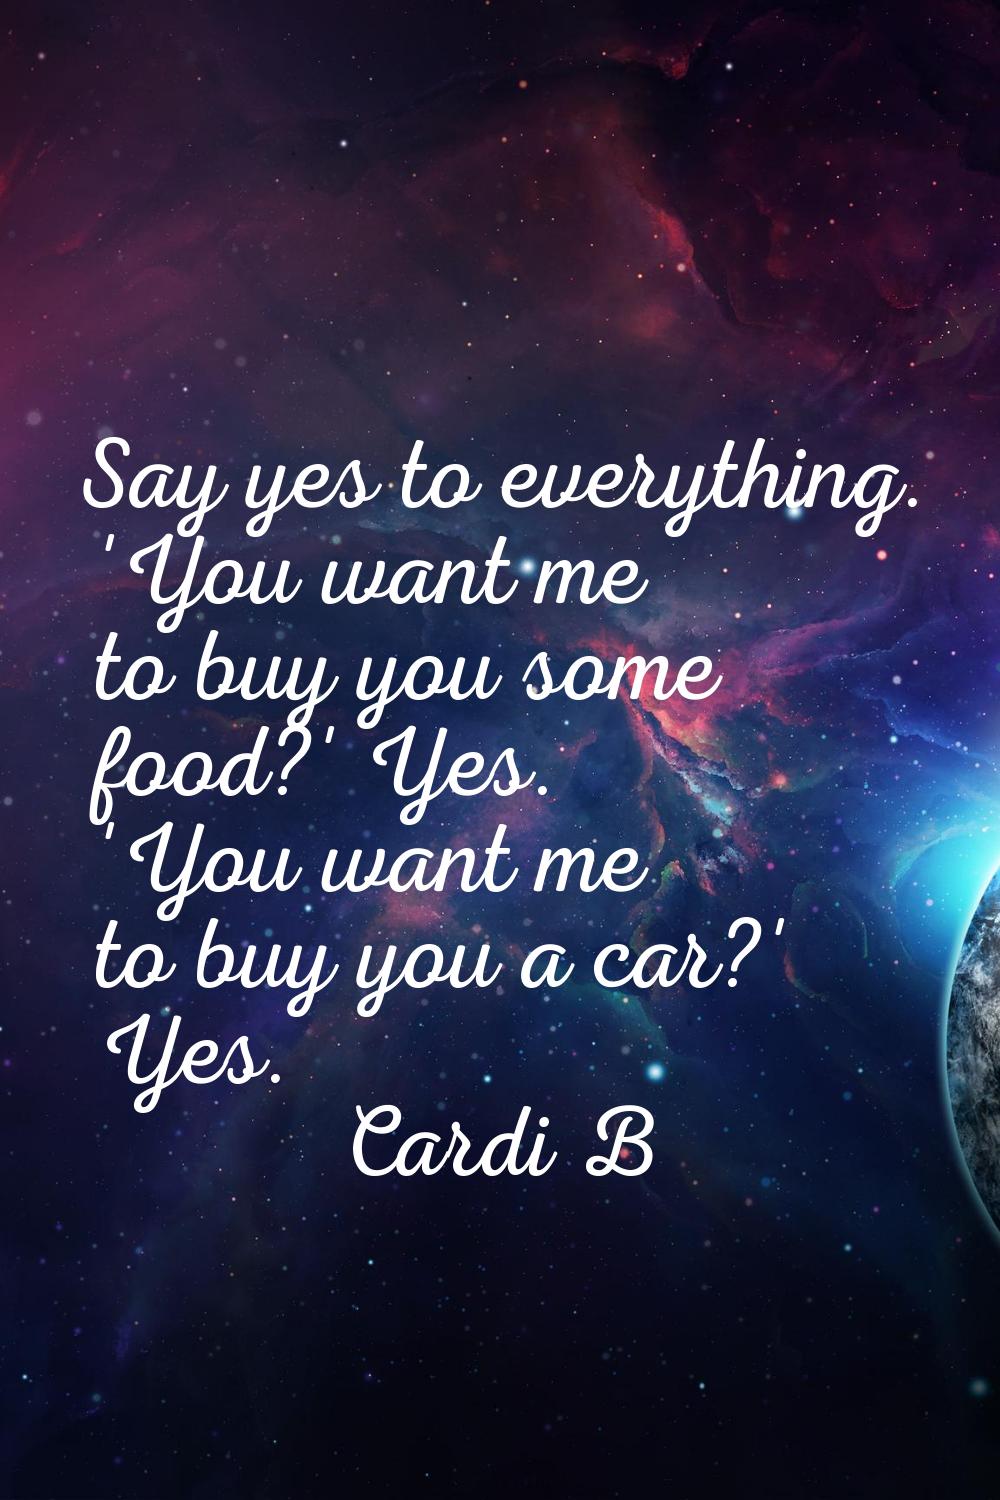 Say yes to everything. 'You want me to buy you some food?' Yes. 'You want me to buy you a car?' Yes